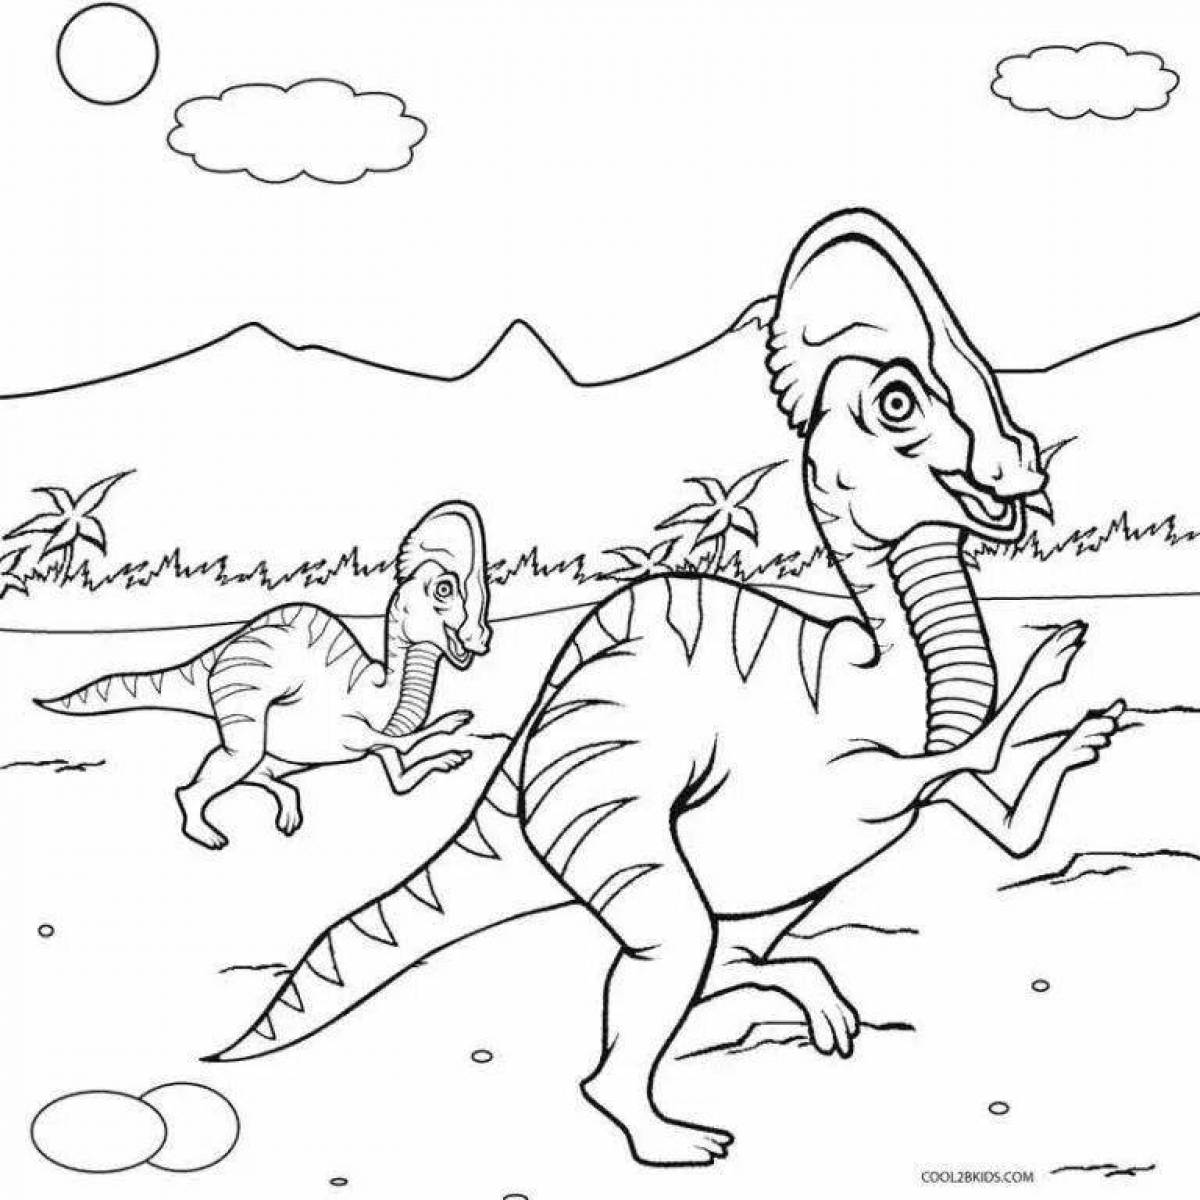 Coloring fairy tale dinosaur games